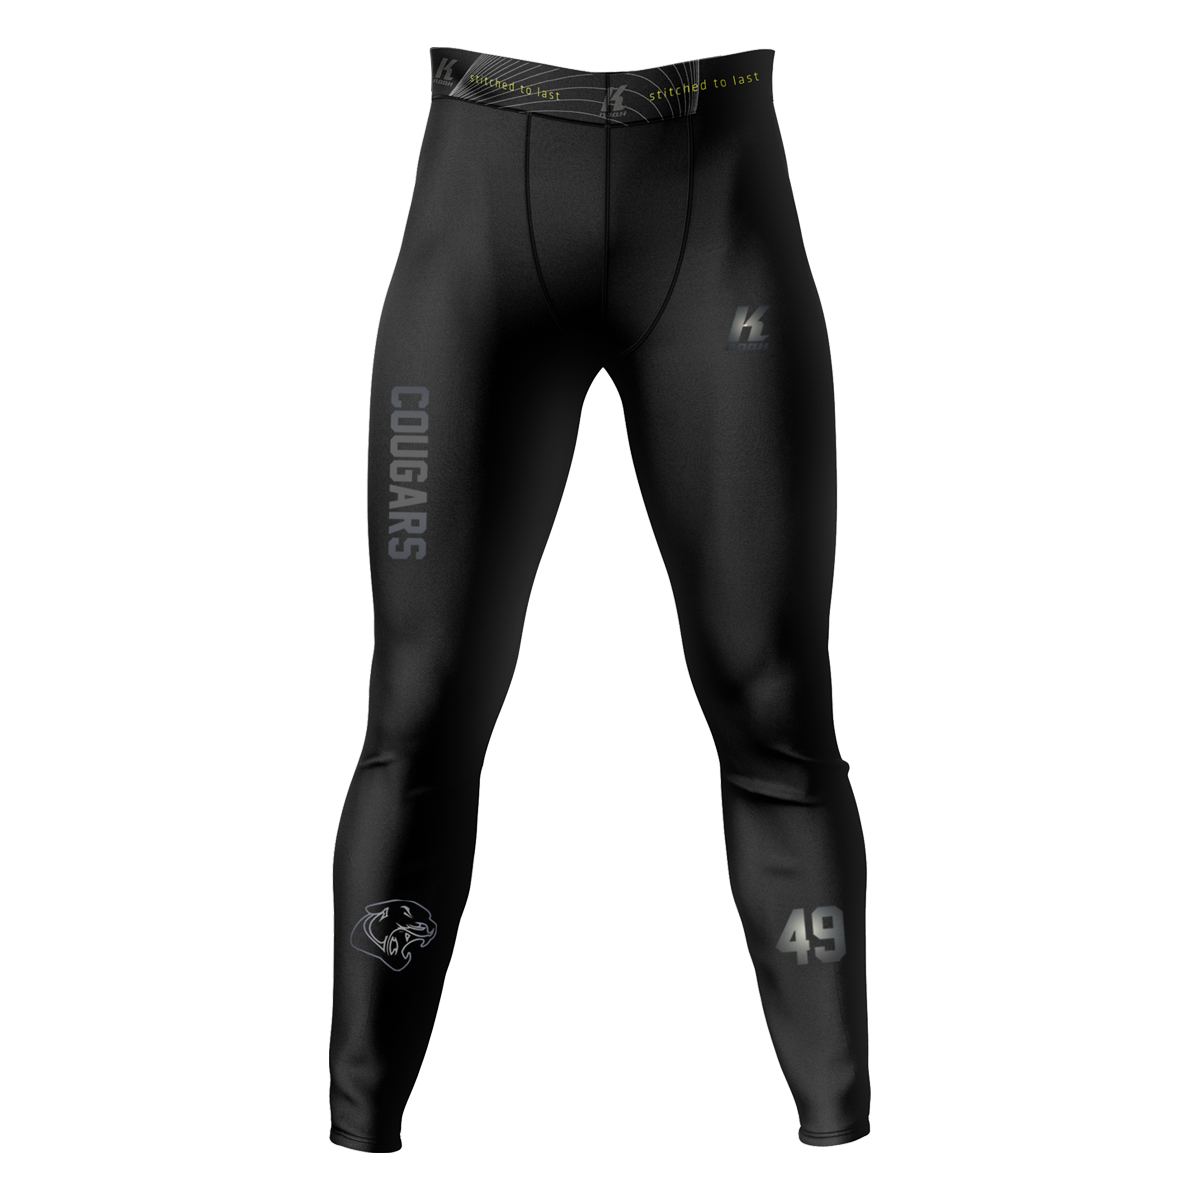 Cougars "Blackline" K.Tech Fiber Compression Pant BA0514 with Playernumber/Initials